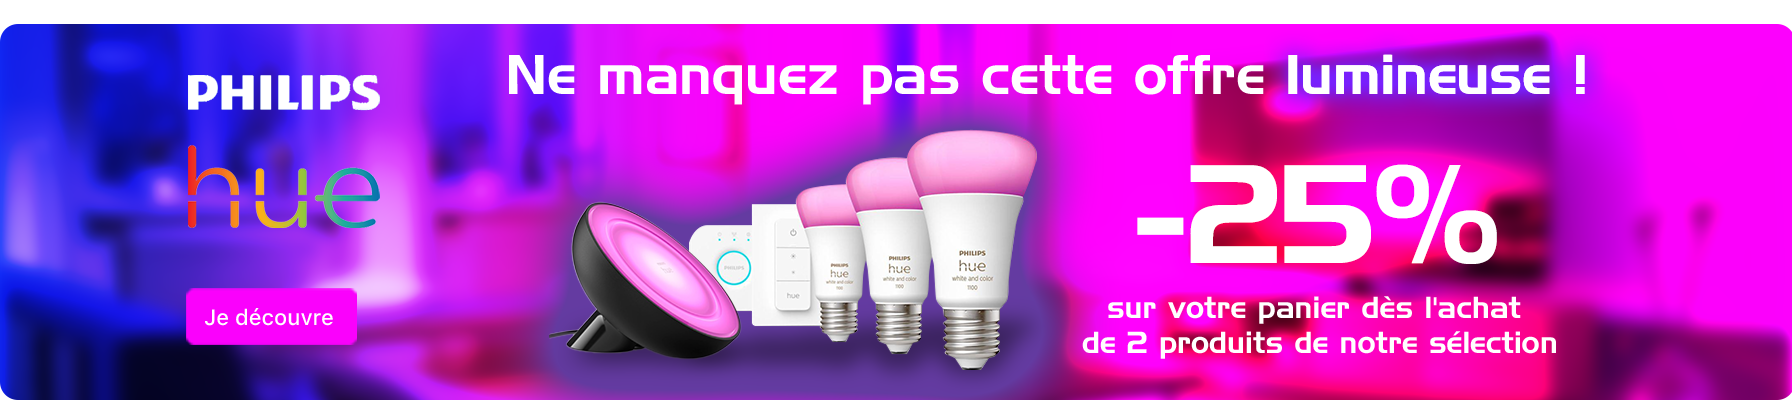 PROMOS PHILIPS HUE